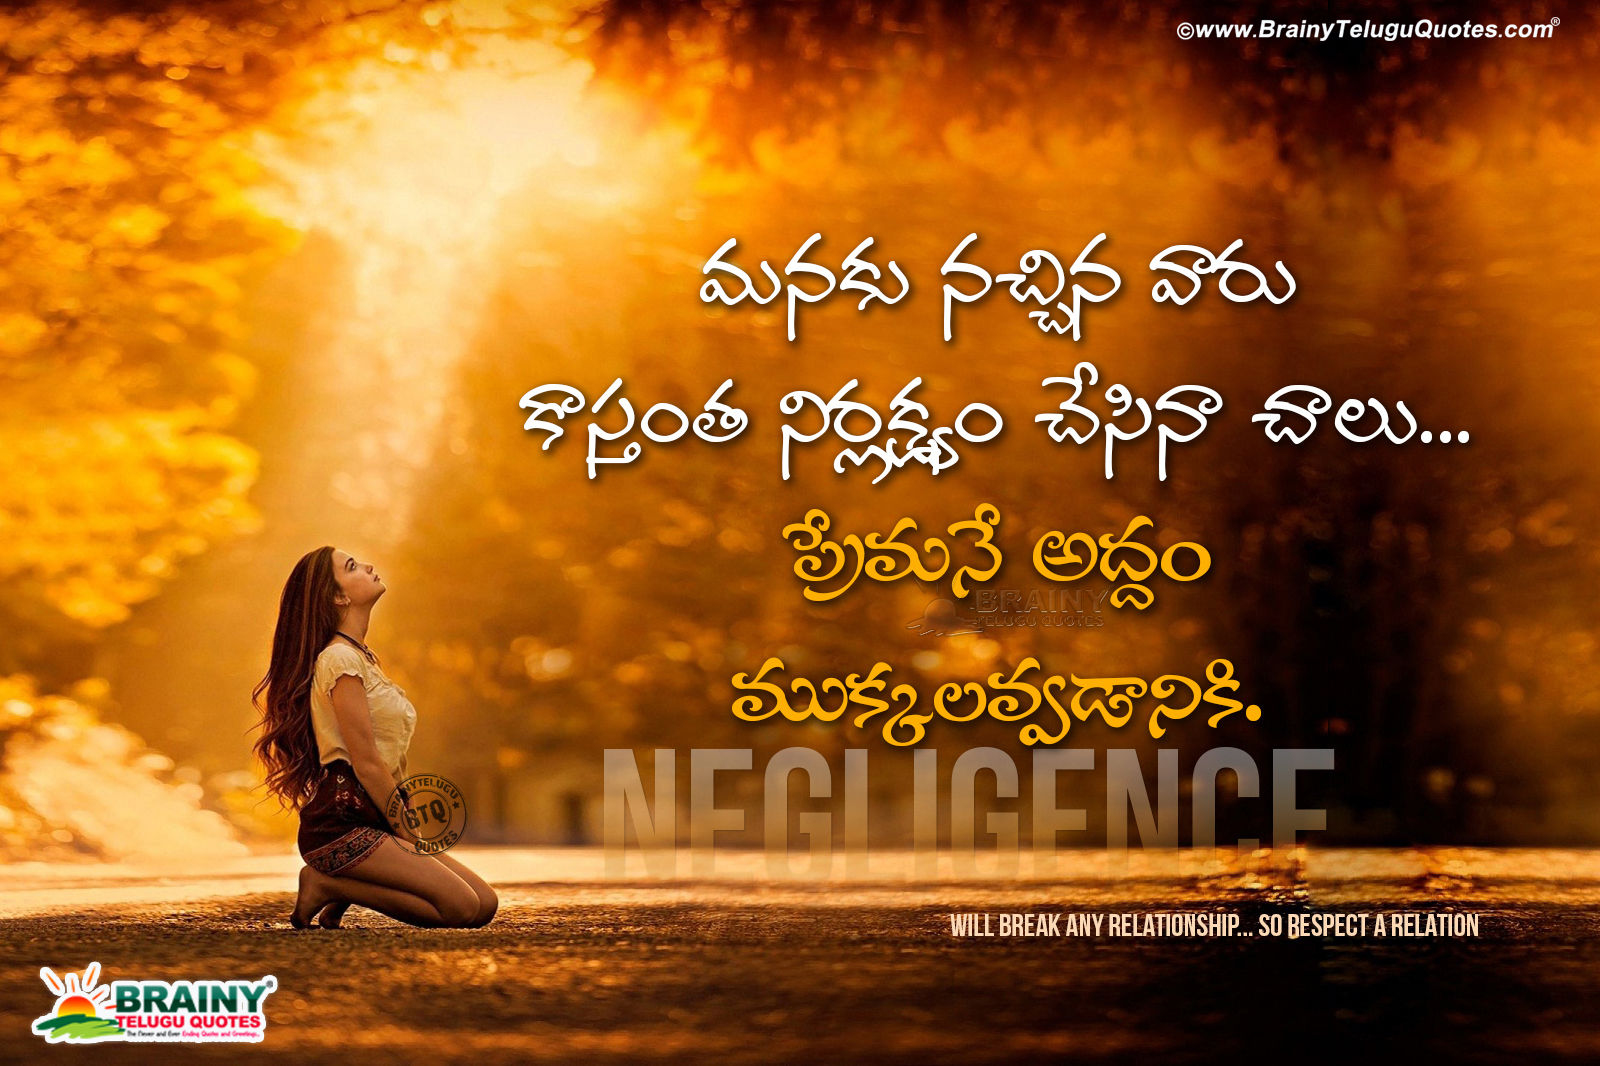 Nice Telugu Relationship Quotes Inspirational Sayings In -9608